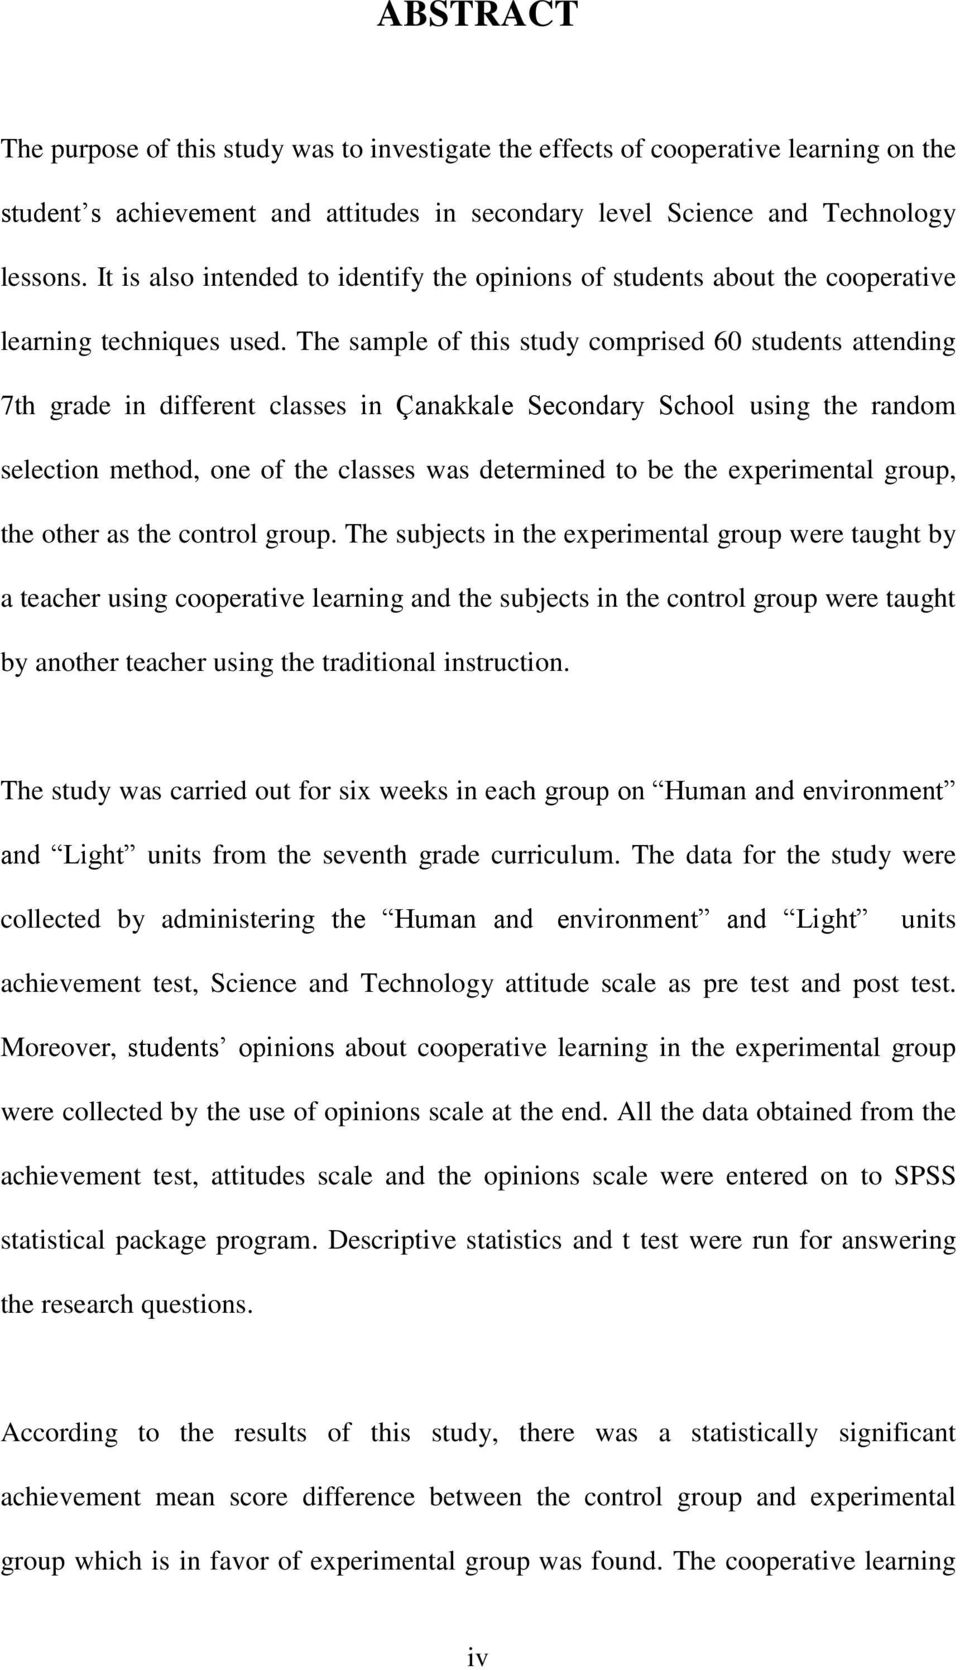 The sample of this study comprised 60 students attending 7th grade in different classes in Çanakkale Secondary School using the random selection method, one of the classes was determined to be the